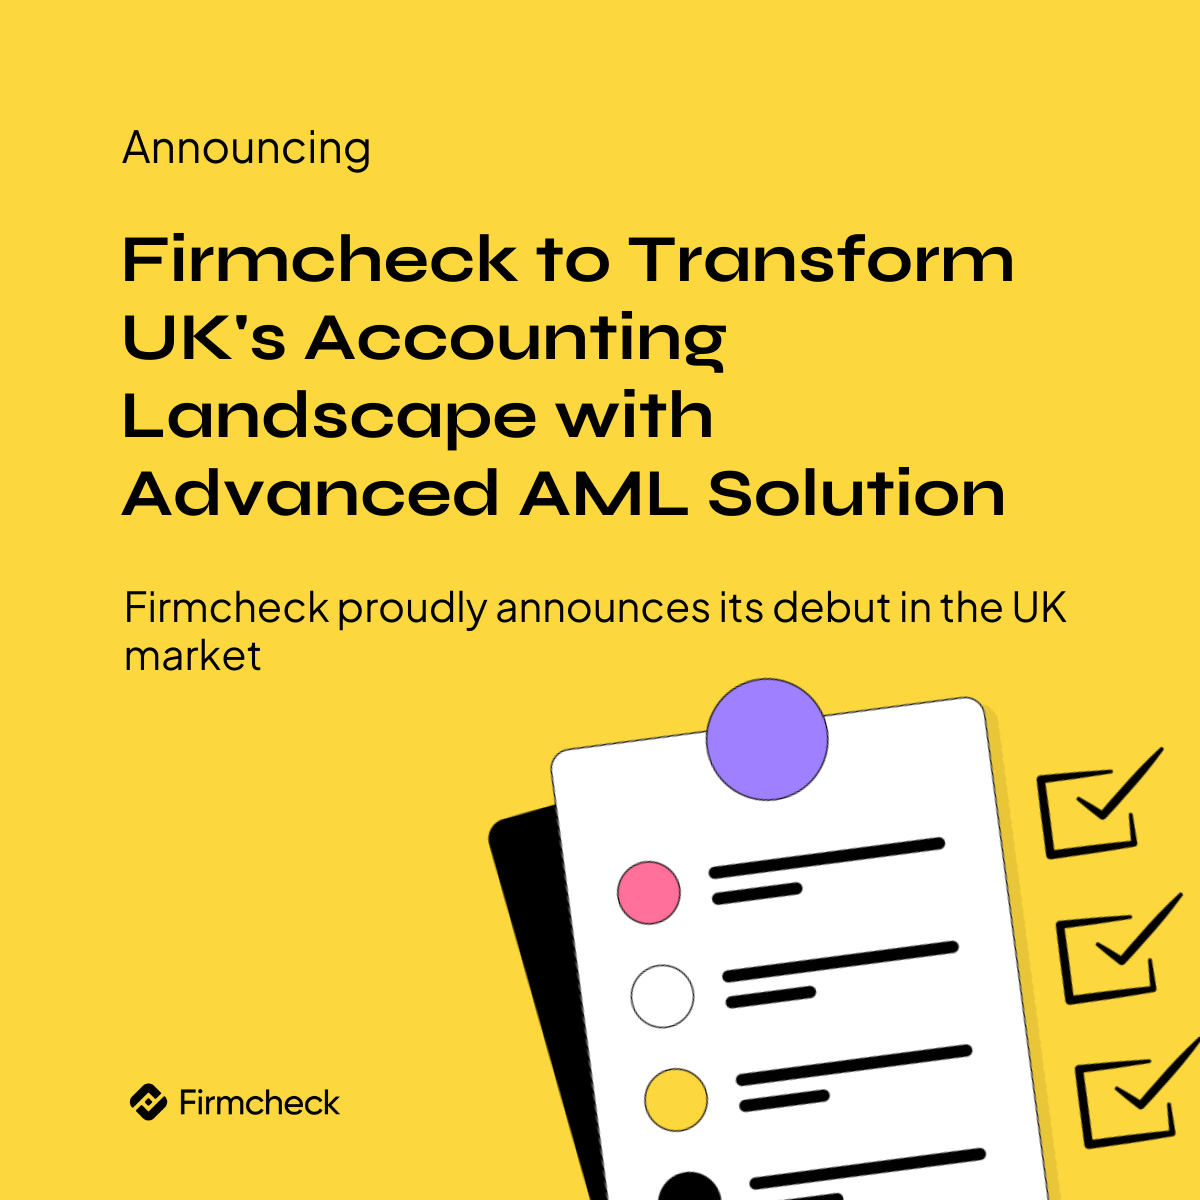 Firmcheck Set to Transform UK's Accounting Landscape with Advanced AML Solutions image